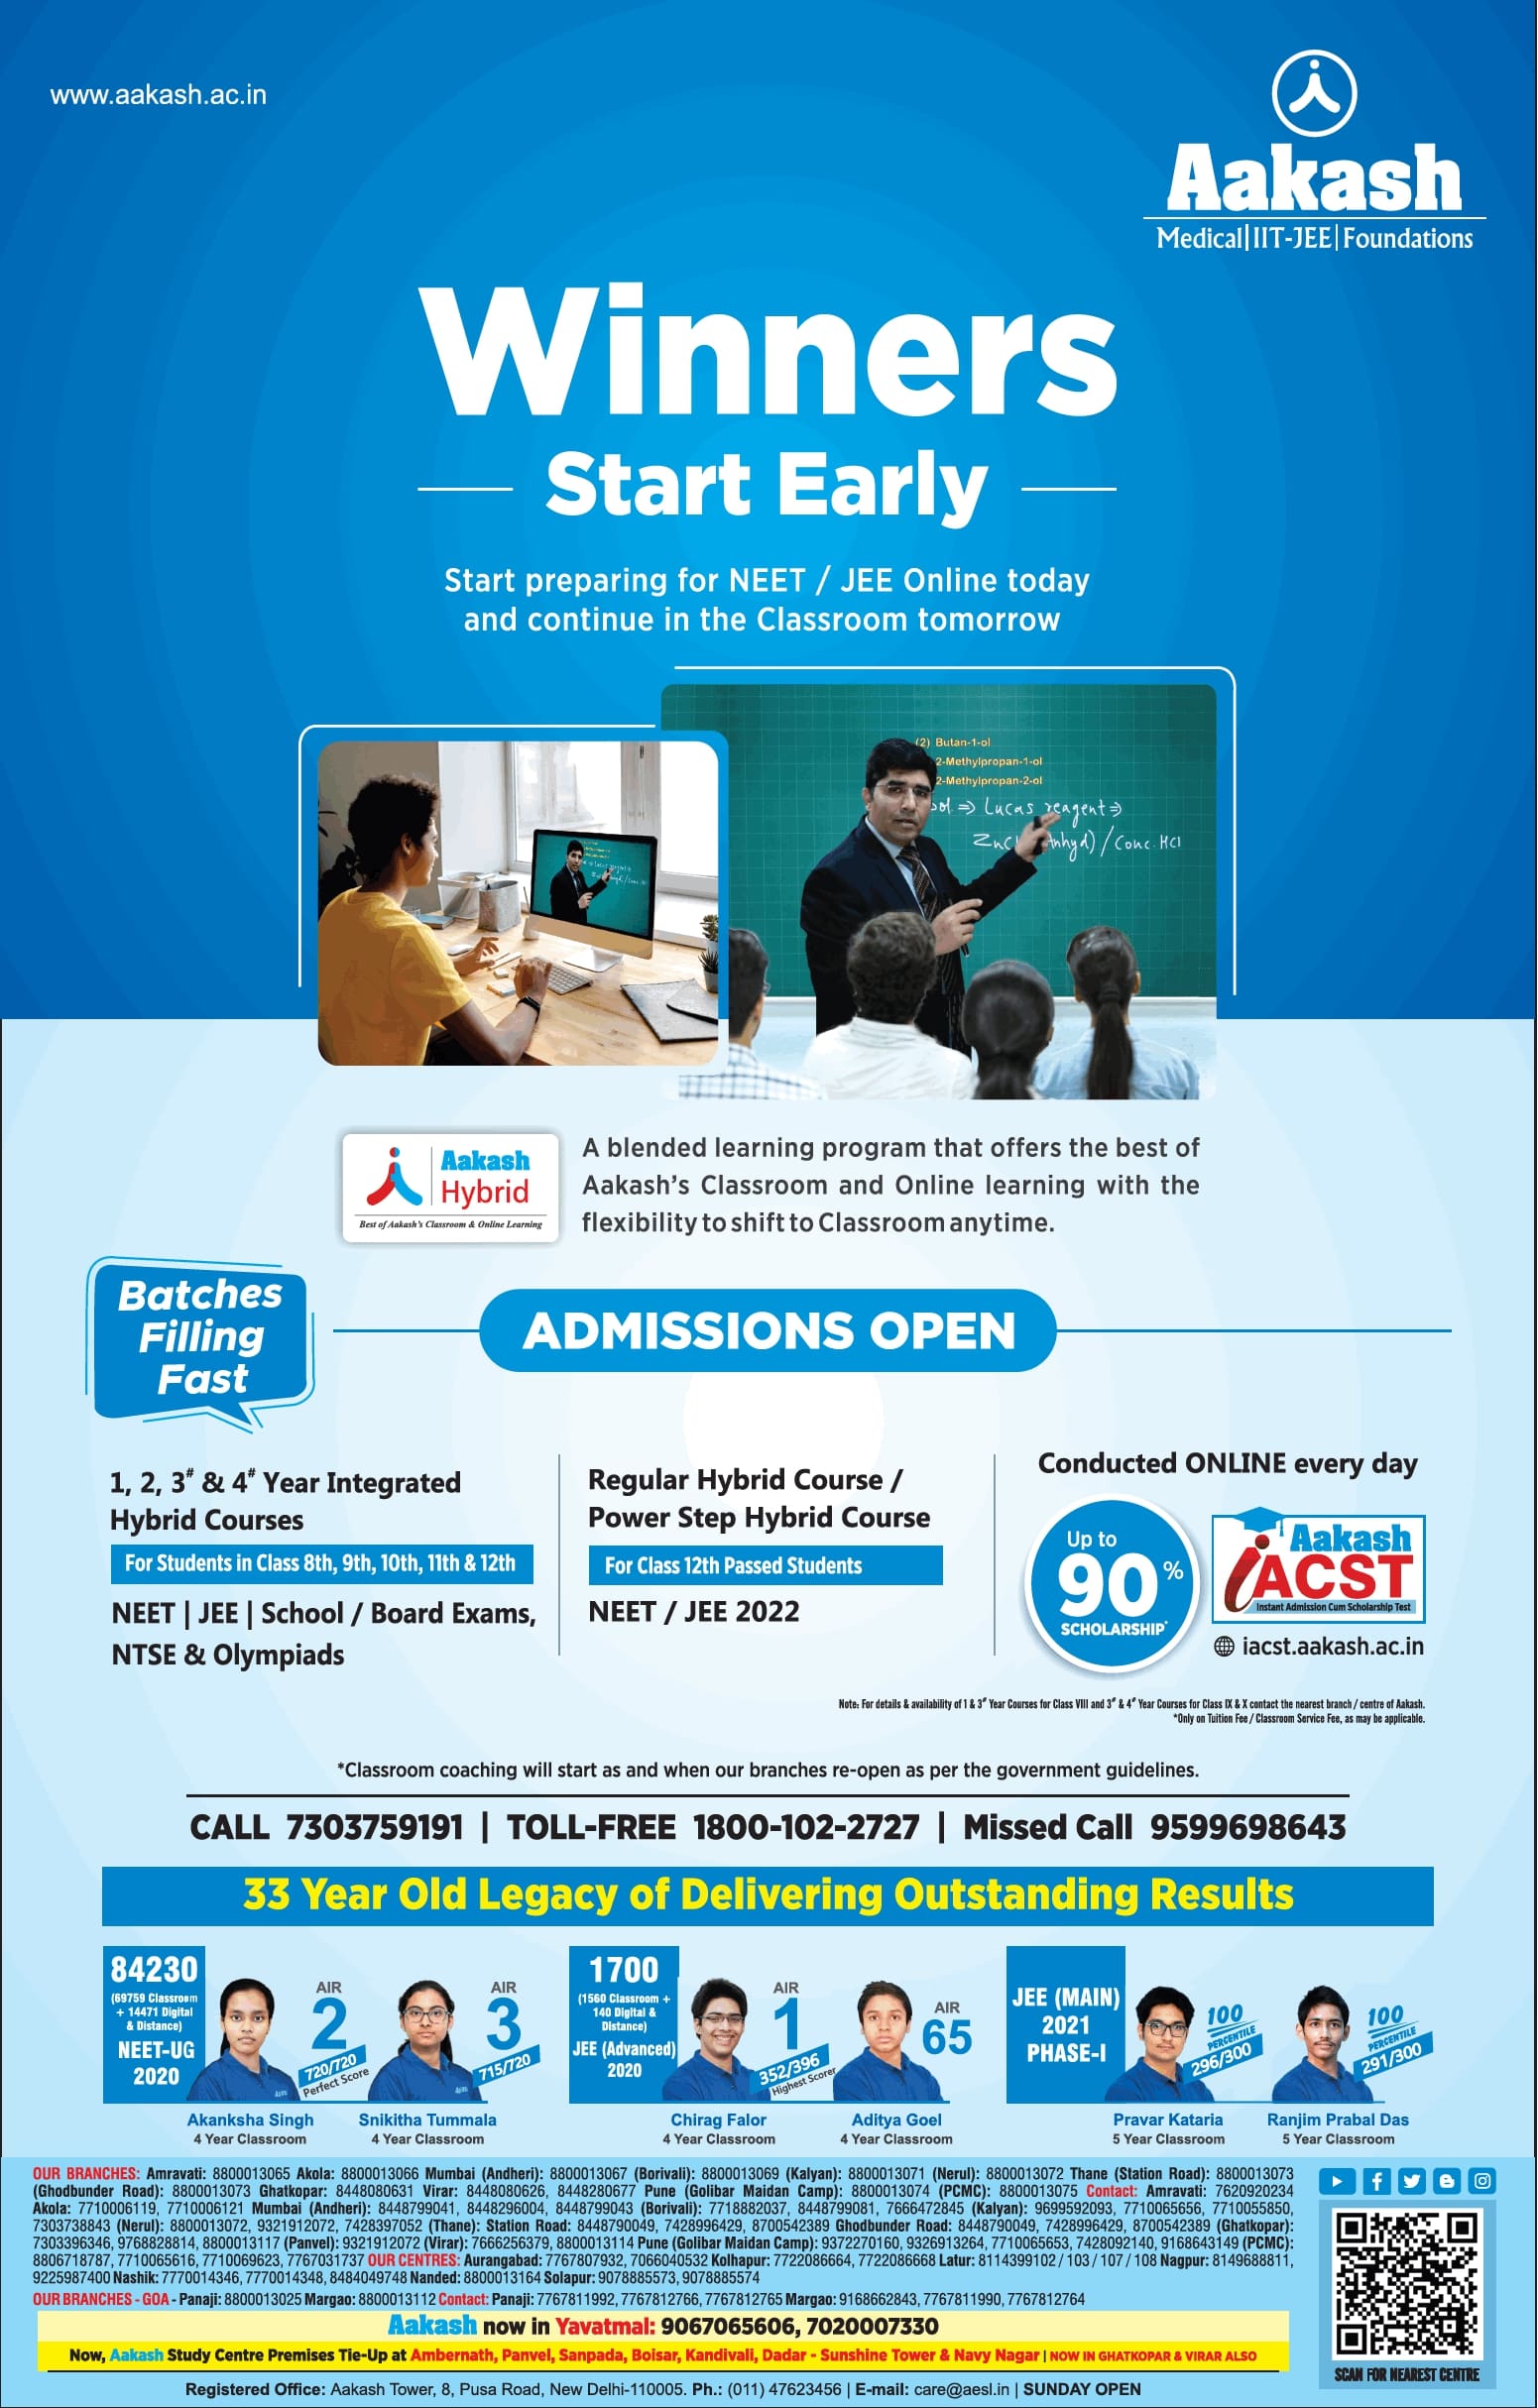 aakash-winners-start-early-admissions-open-ad-times-of-india-mumbai-06-06-2021